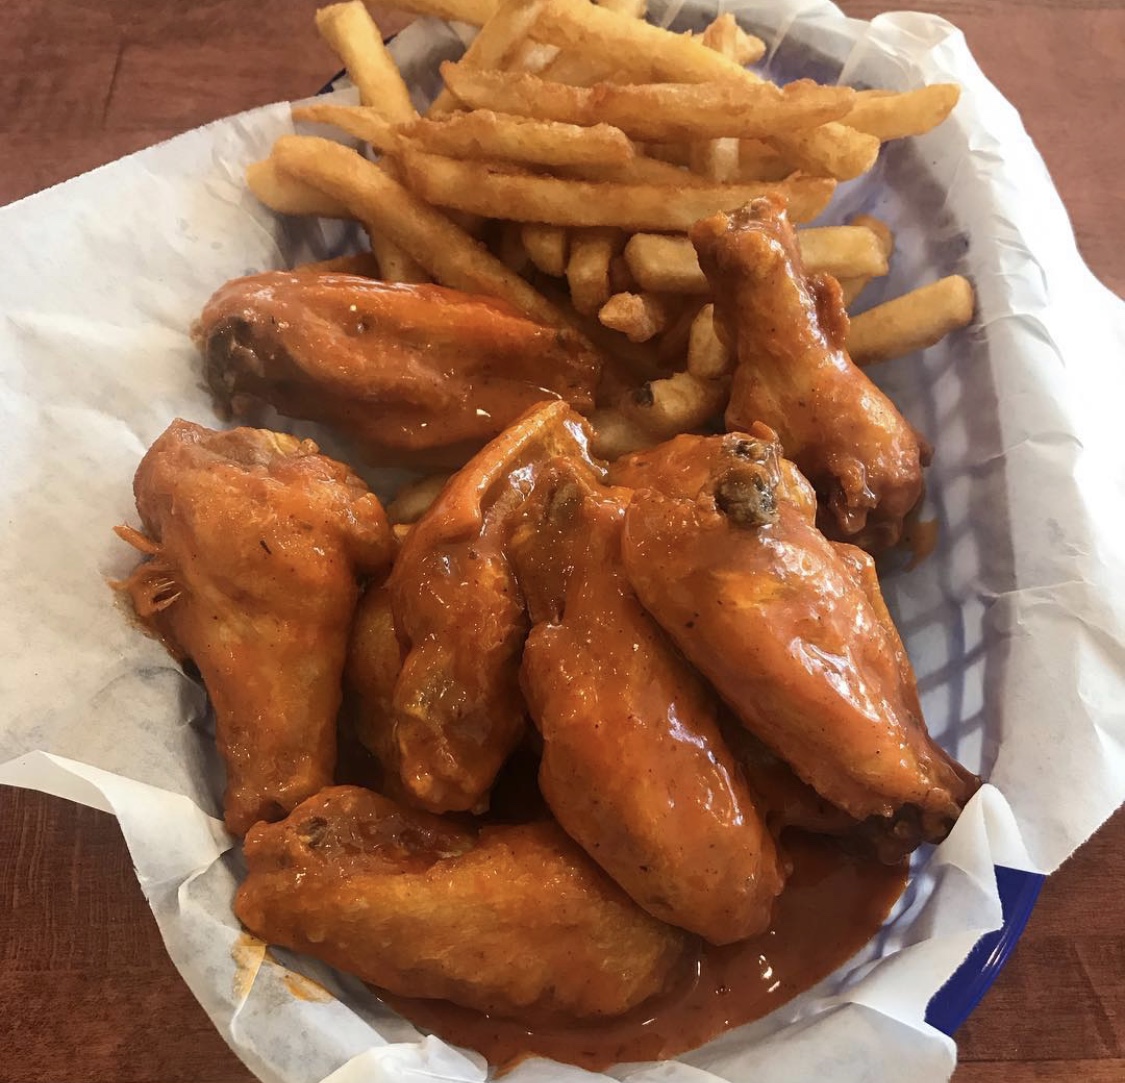 Wings at Touchdown Wings in Huntsville Alabama